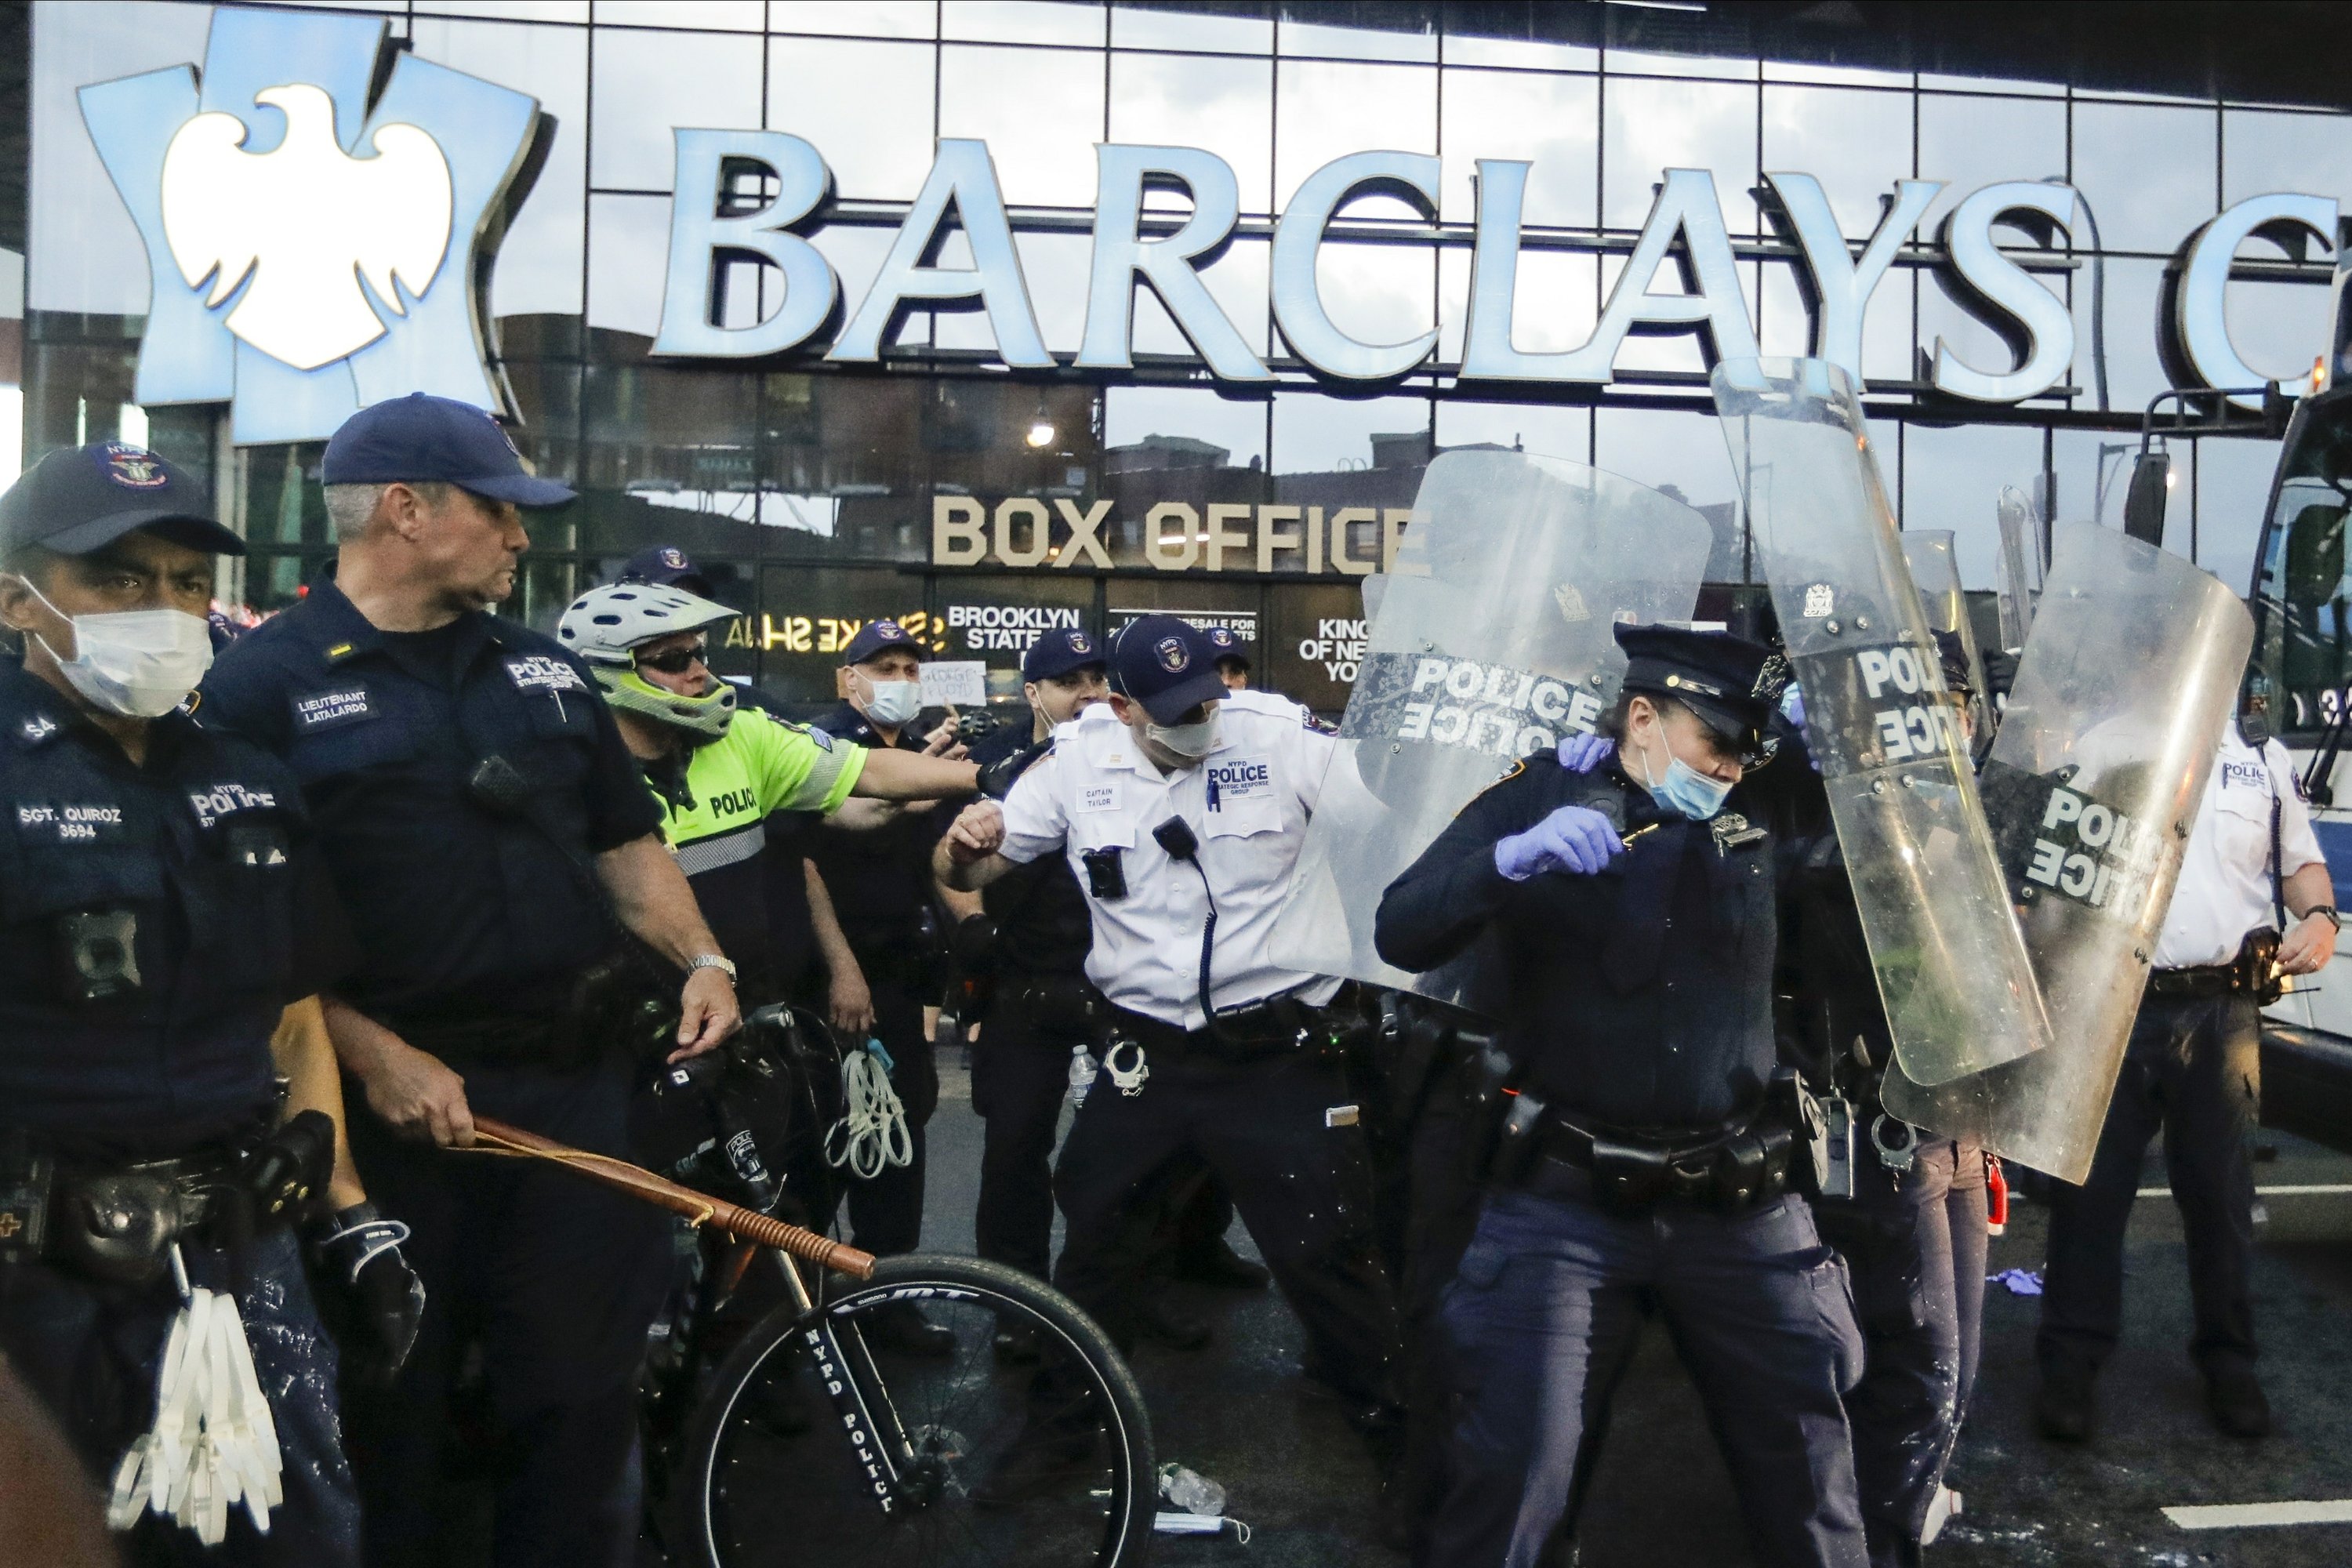 Retreat or deploy? Police try to balance protest response - The Associated Press